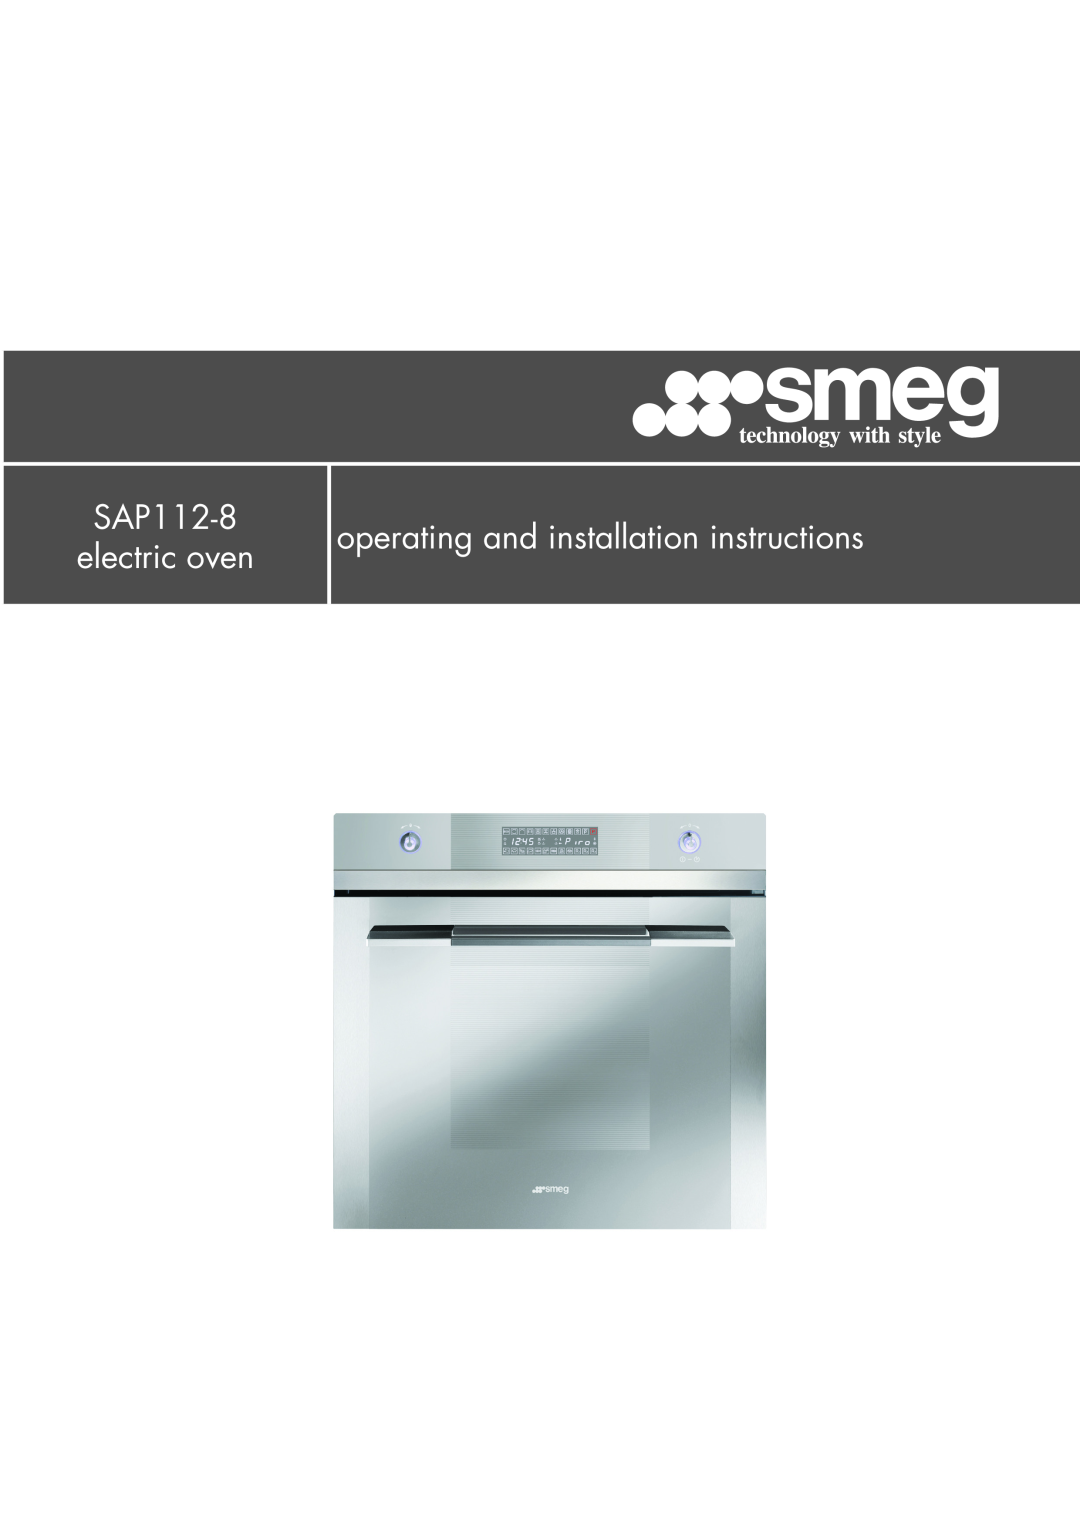 Smeg manual SAP112-8 electric oven, operating and installation instructions 